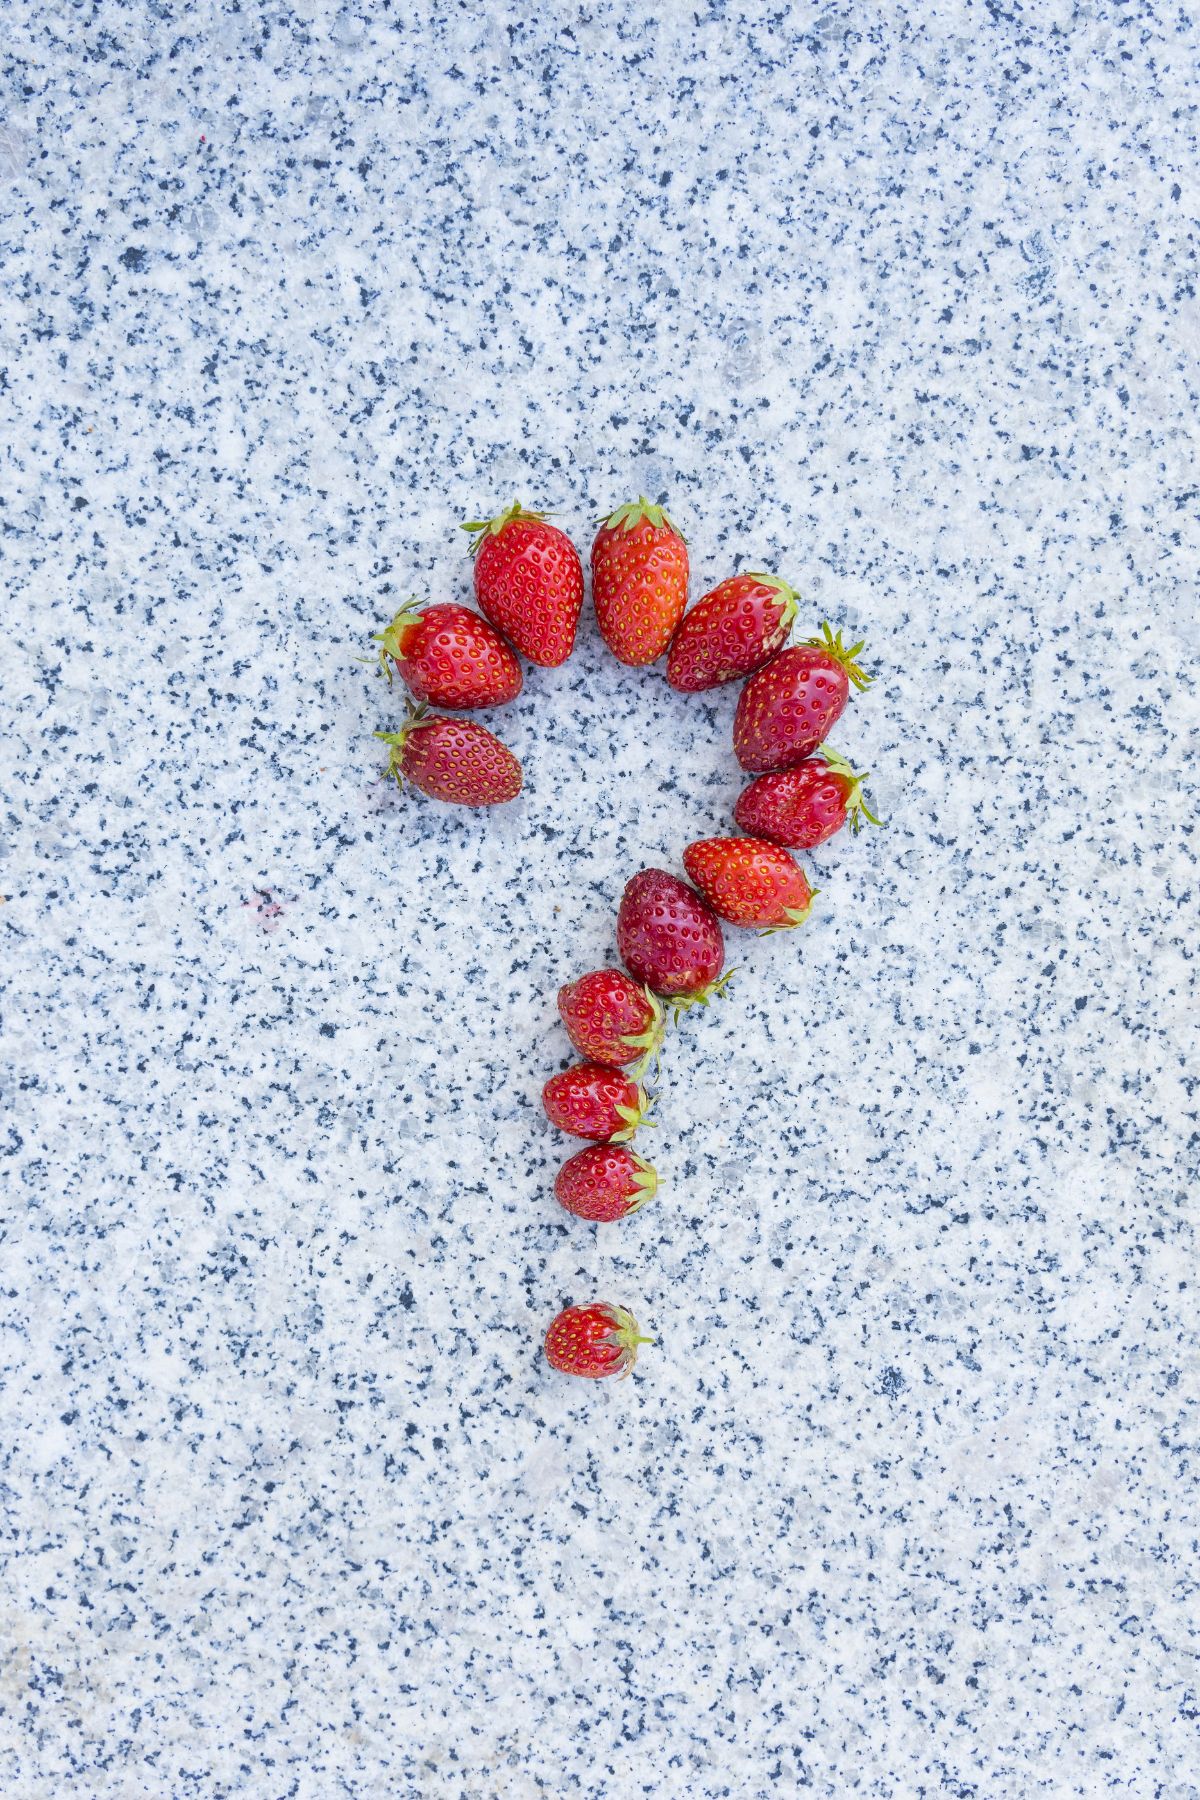 Strawberries on a counter in a question mark shape